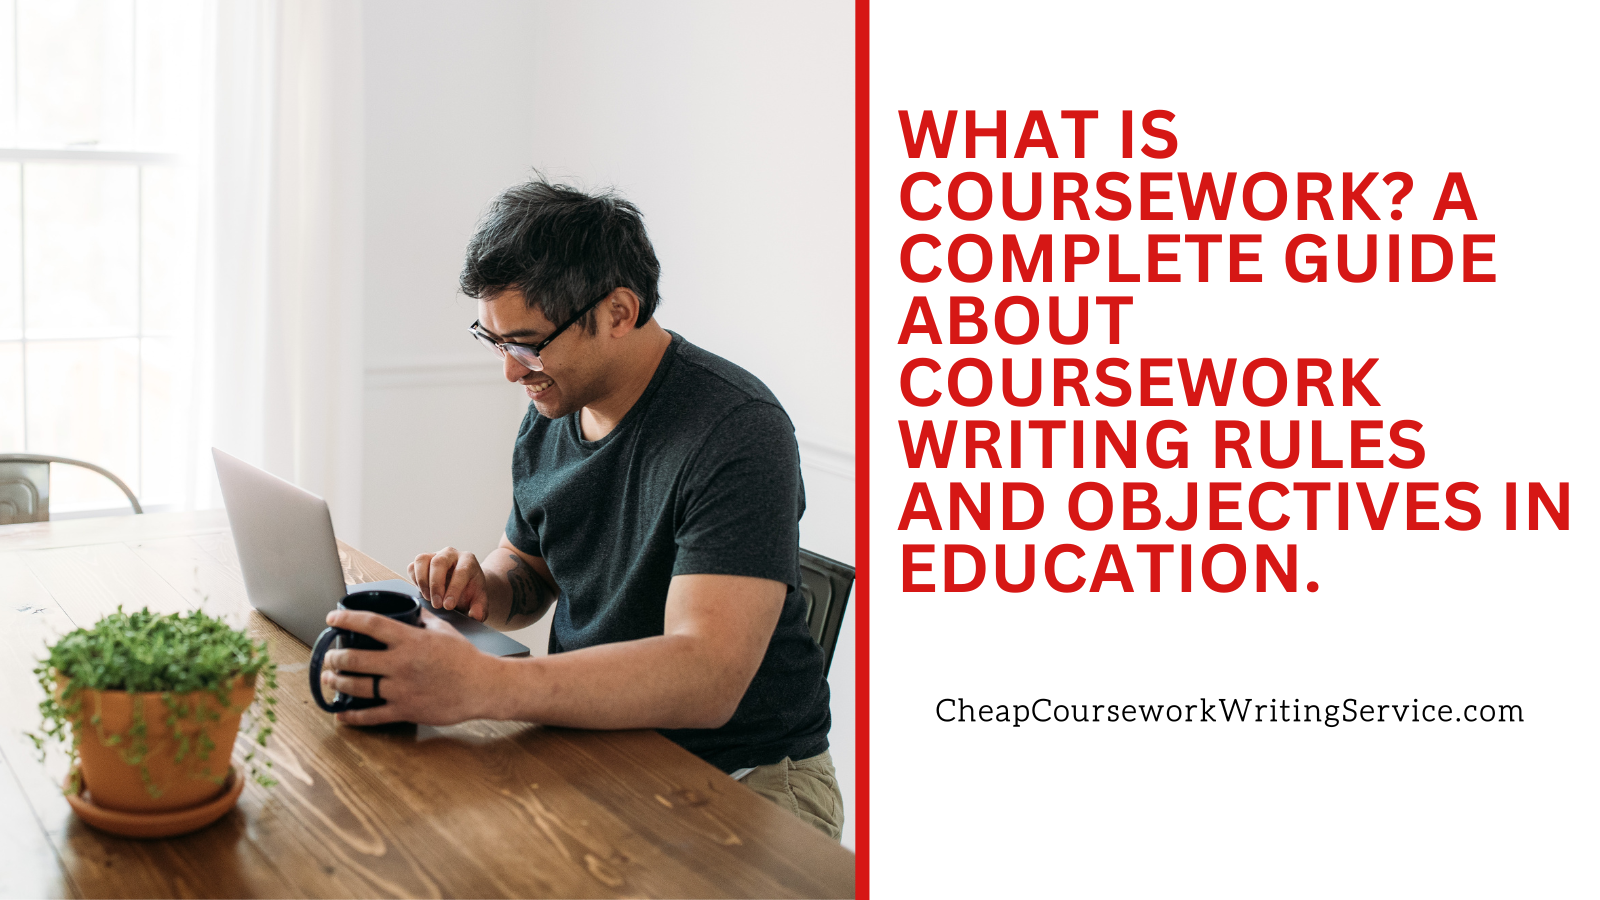 what is coursework? a complete guide about coursework writing rules and objectives in education.